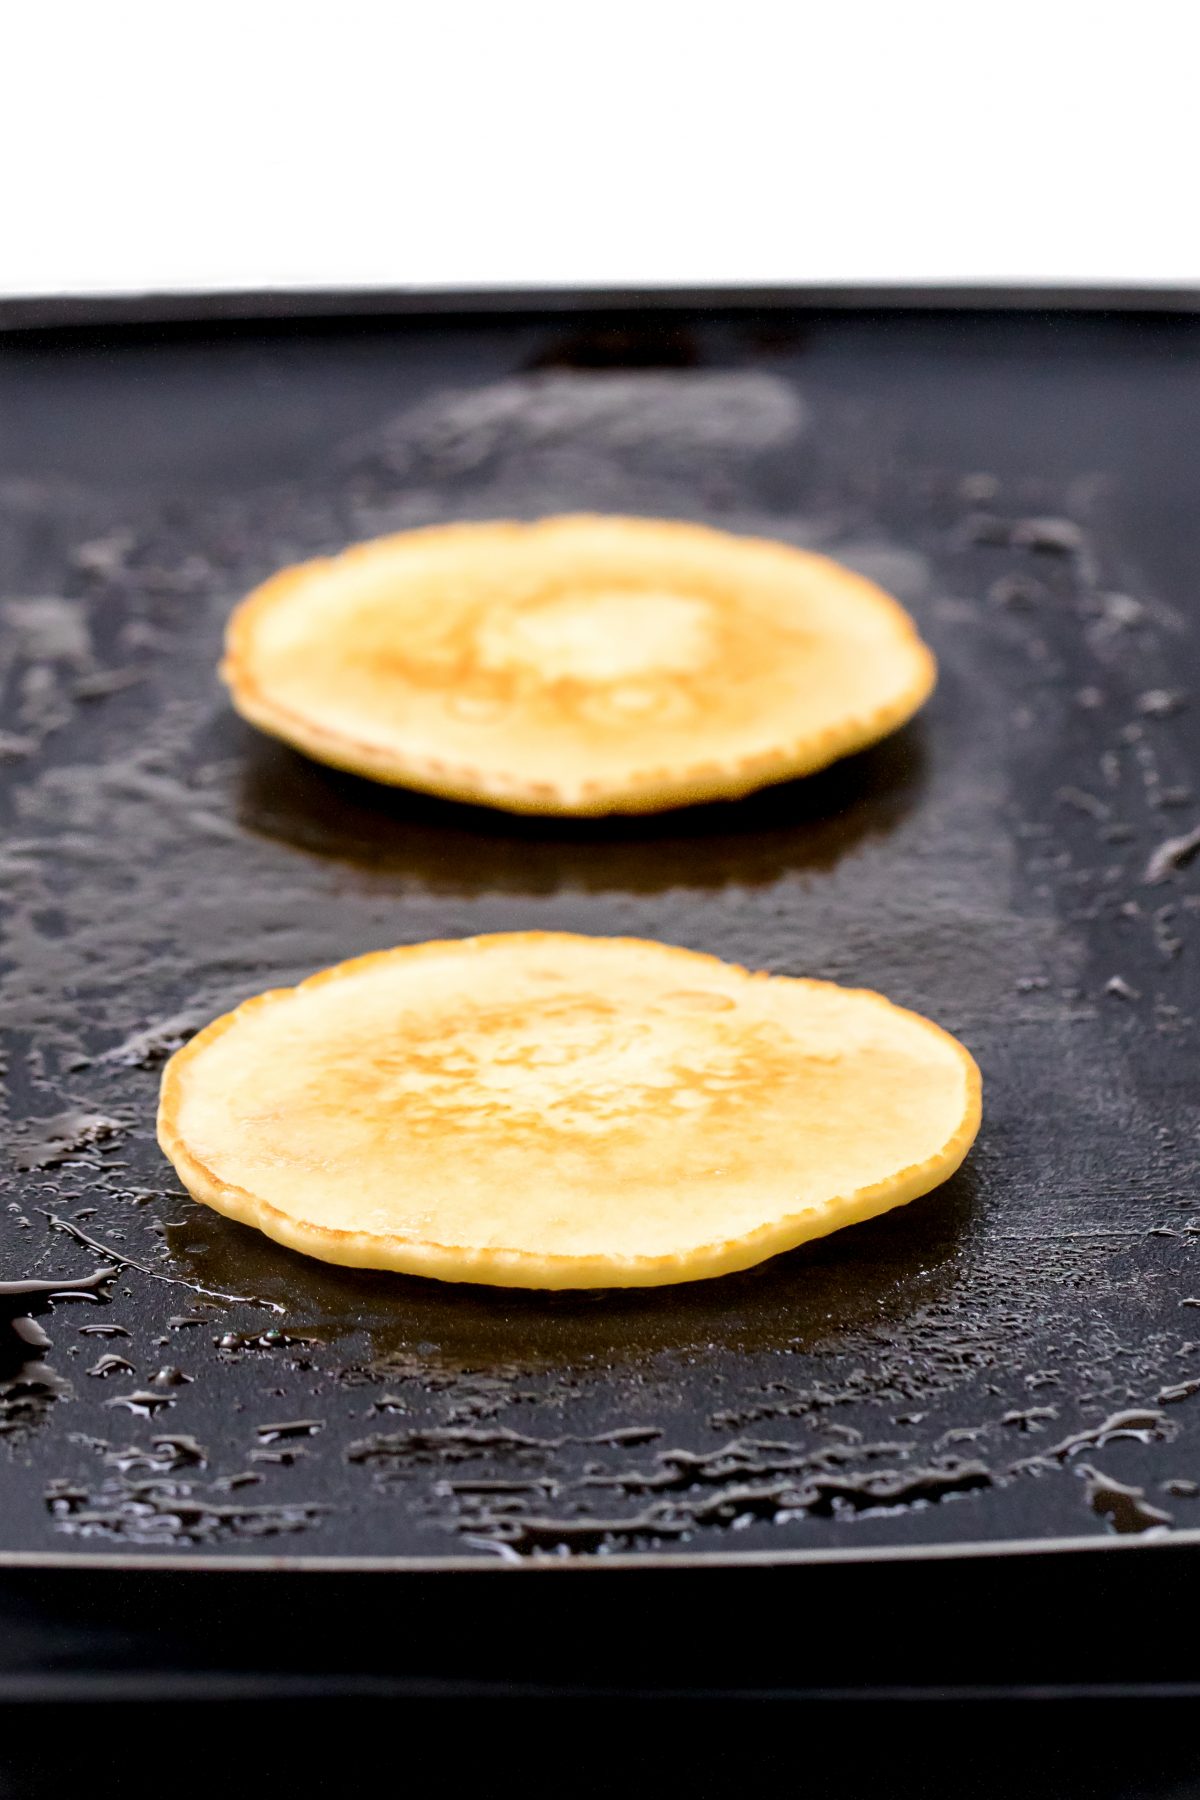 Allow other side of pancakes to get golden brown